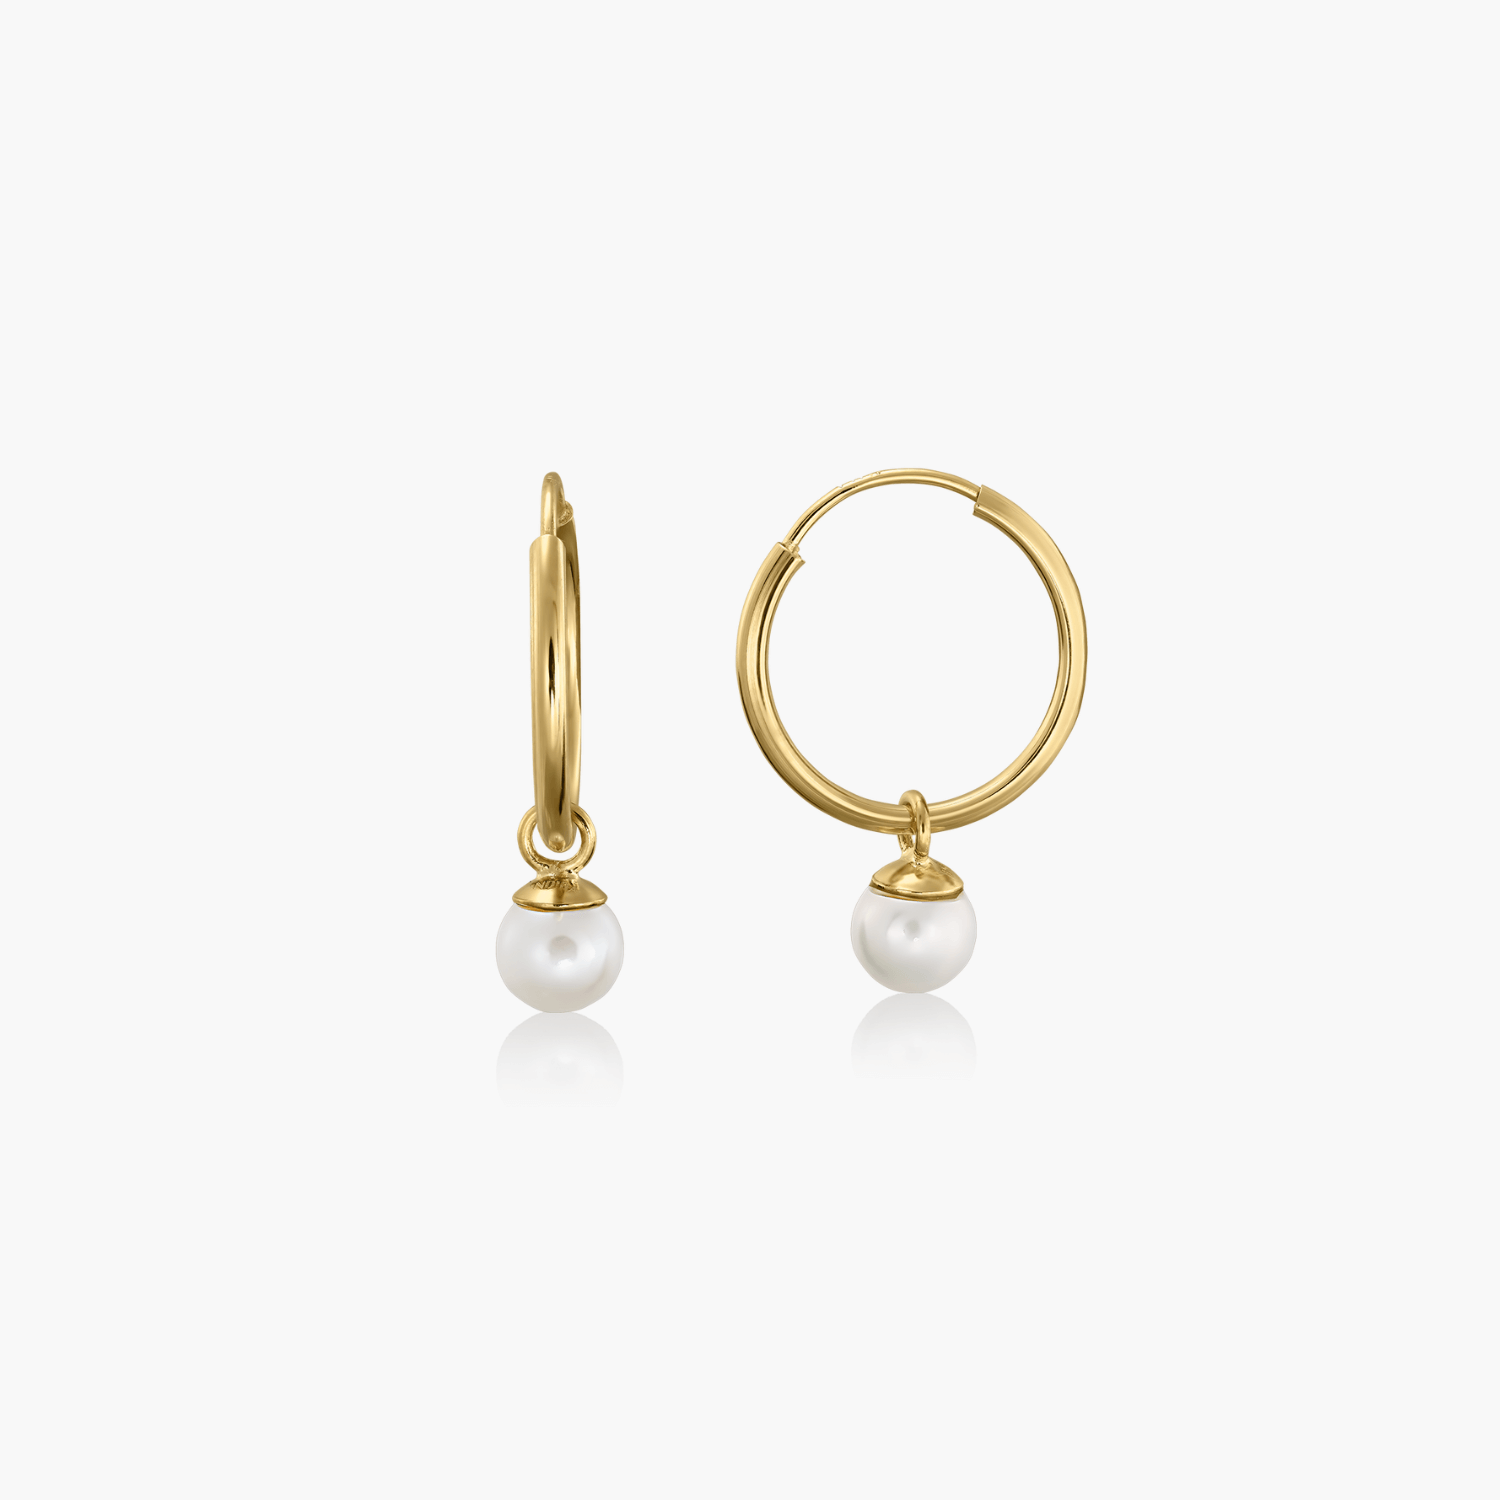 Ruth gold earrings - Natural pearls